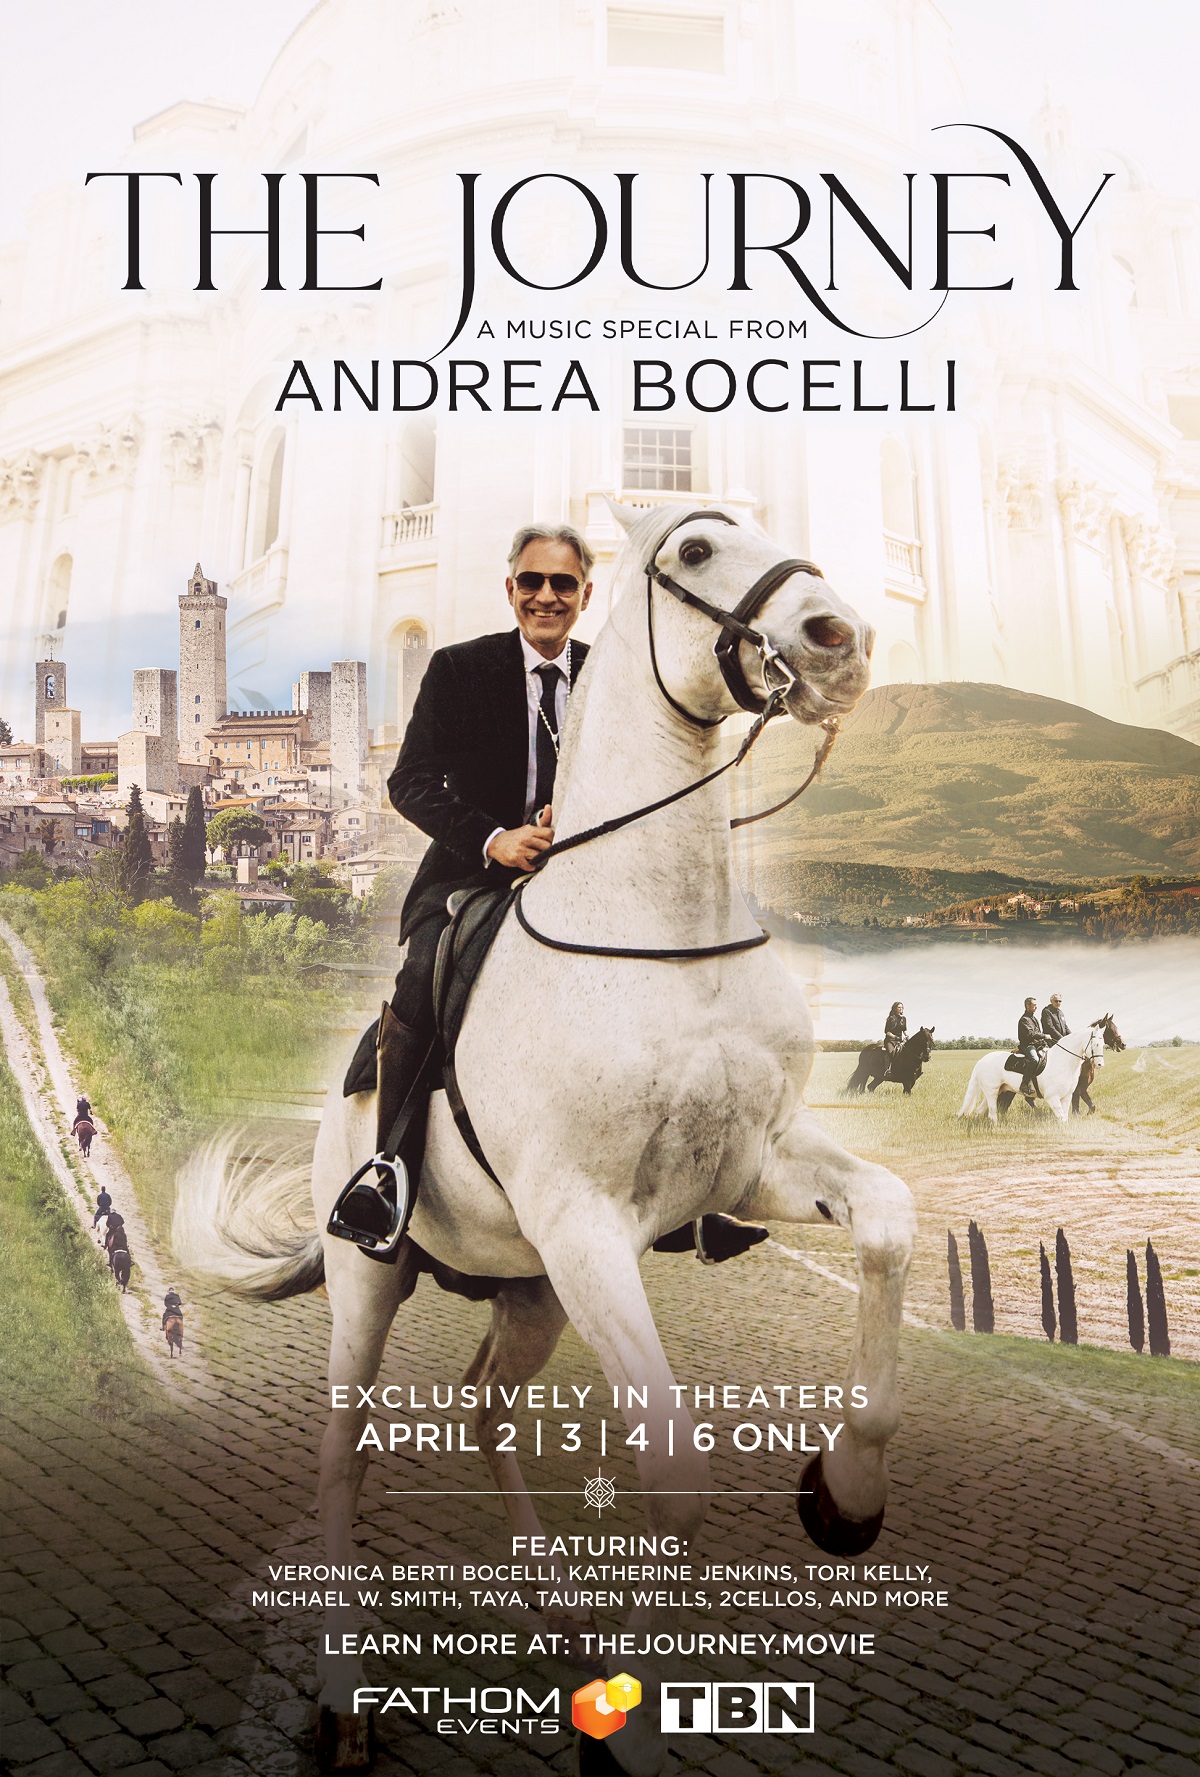 NOT FOR REUSE: THE JOURNEY: A Music Special from Andrea Bocelli poster